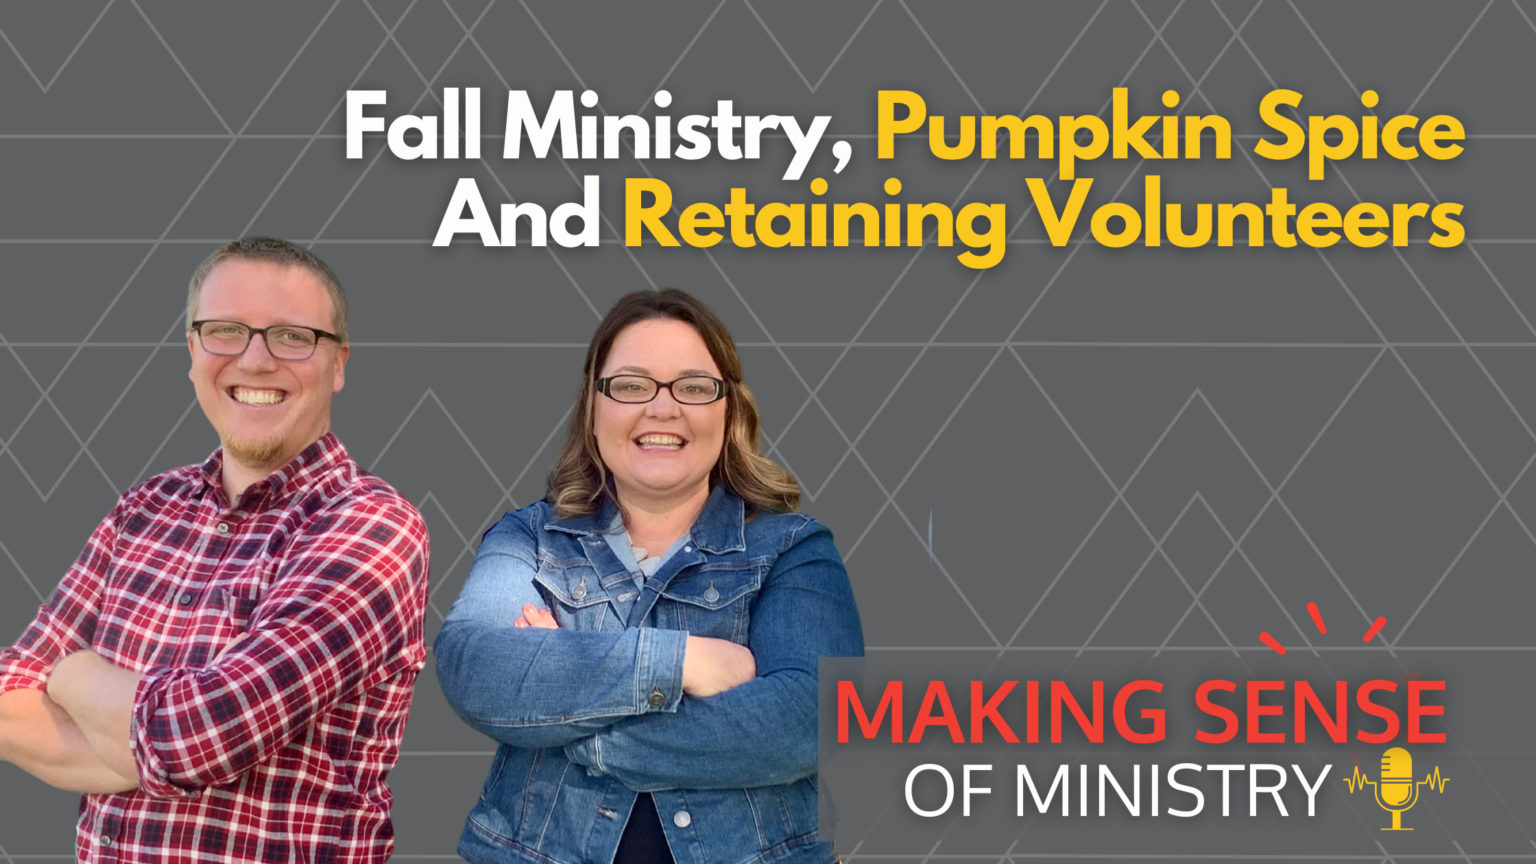 Season 4: Episode 1 of the Making Sense of Ministry Podcast